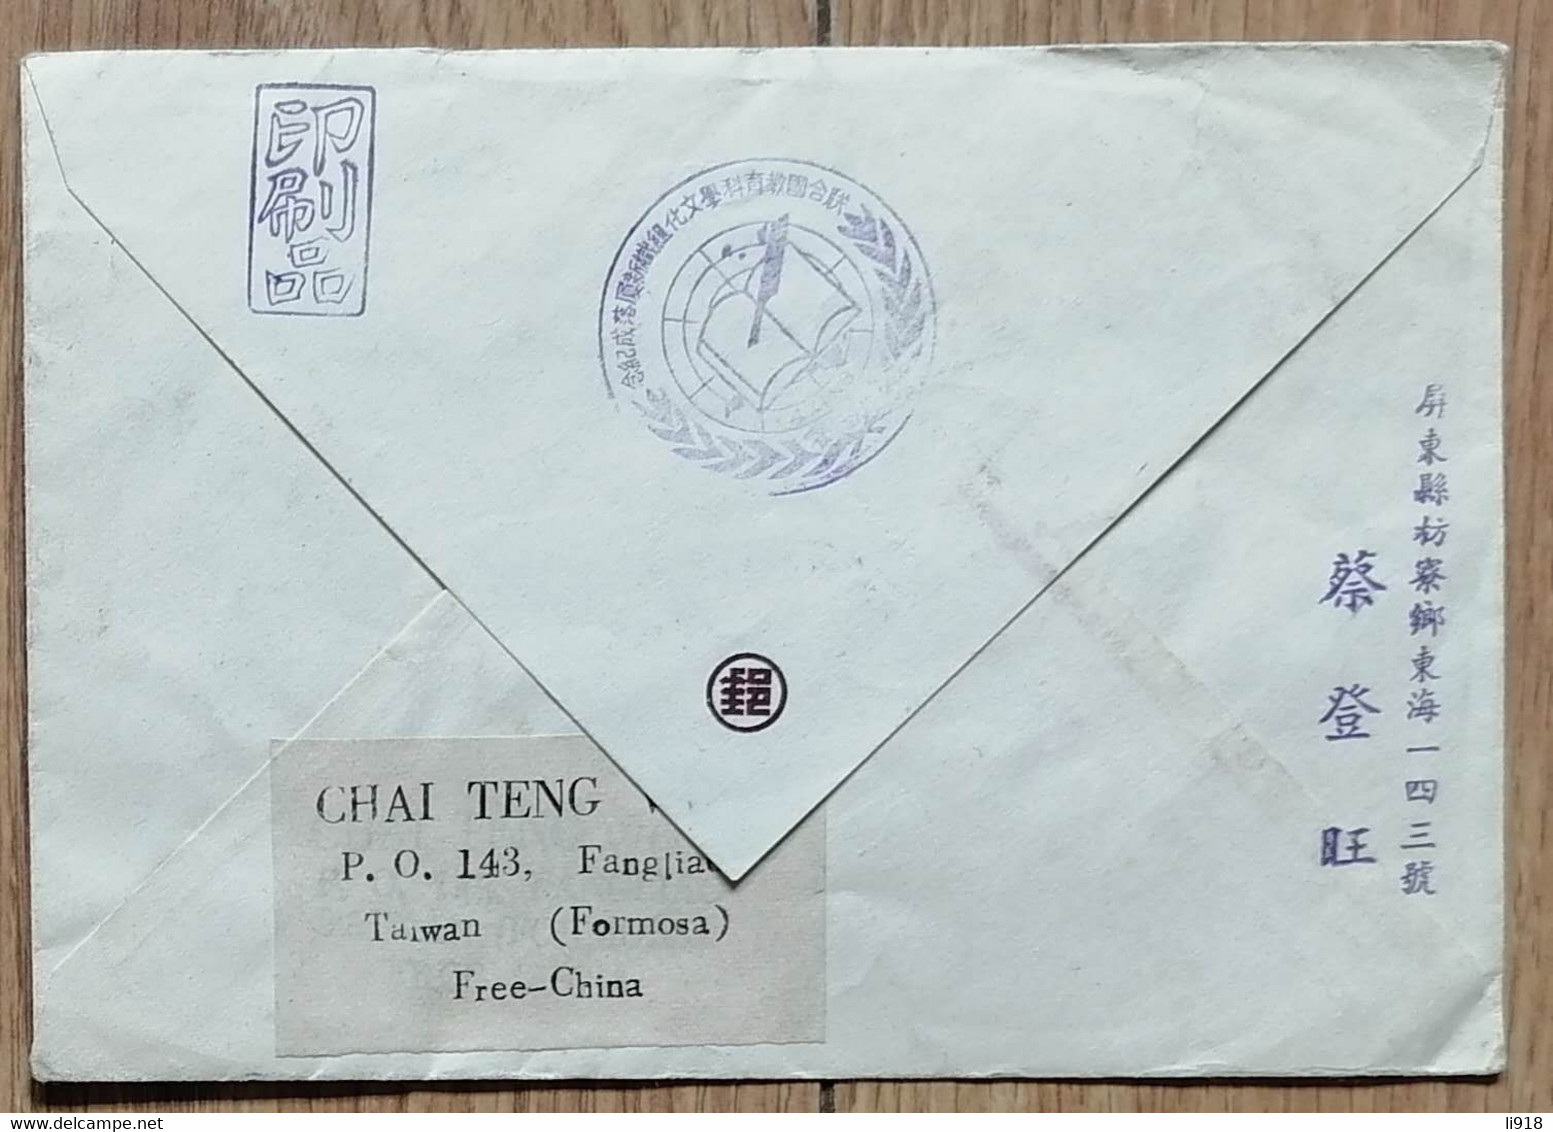 TaiWan 1958 UNESCO FDC Mail To USA - Covers & Documents